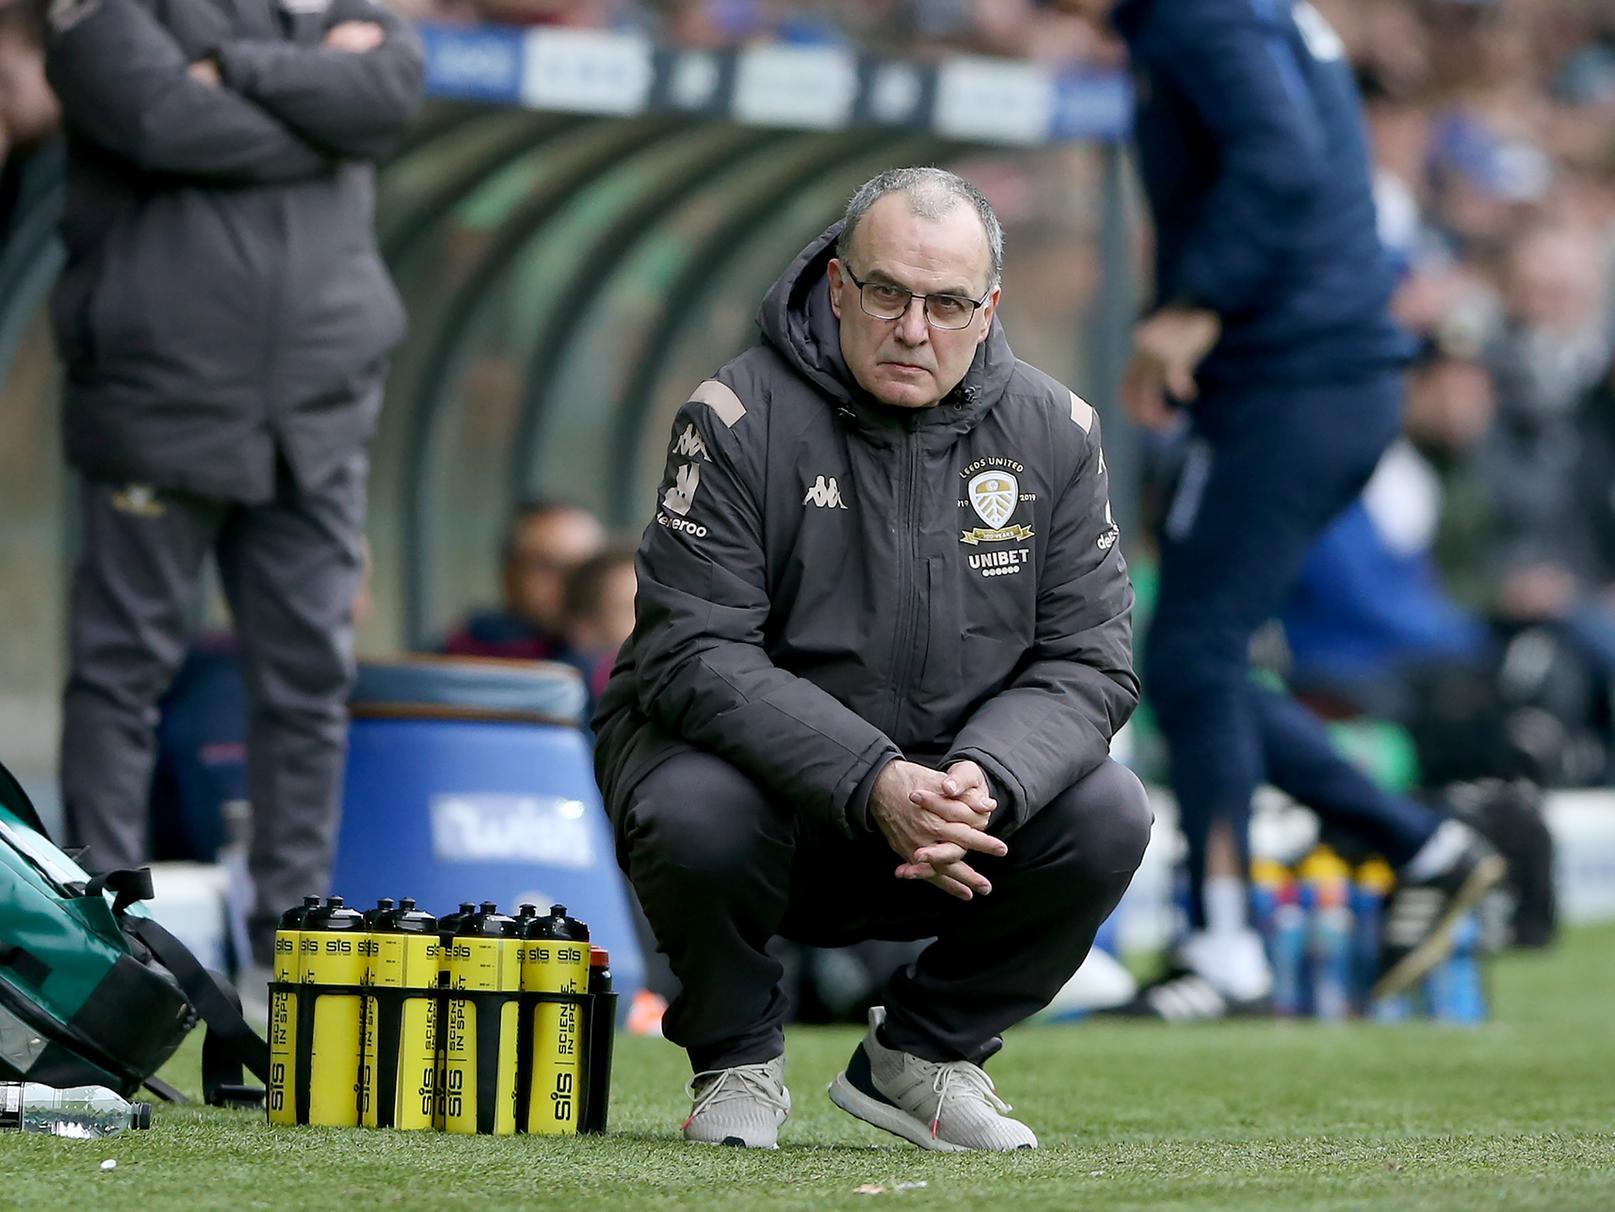 Leeds United boss Marcelo Bielsa has been linked with a shock move to Spanish side Real Betis, as the struggling La Liga look to find a quality replacement for the struggling Rubi. (Sport Witness)